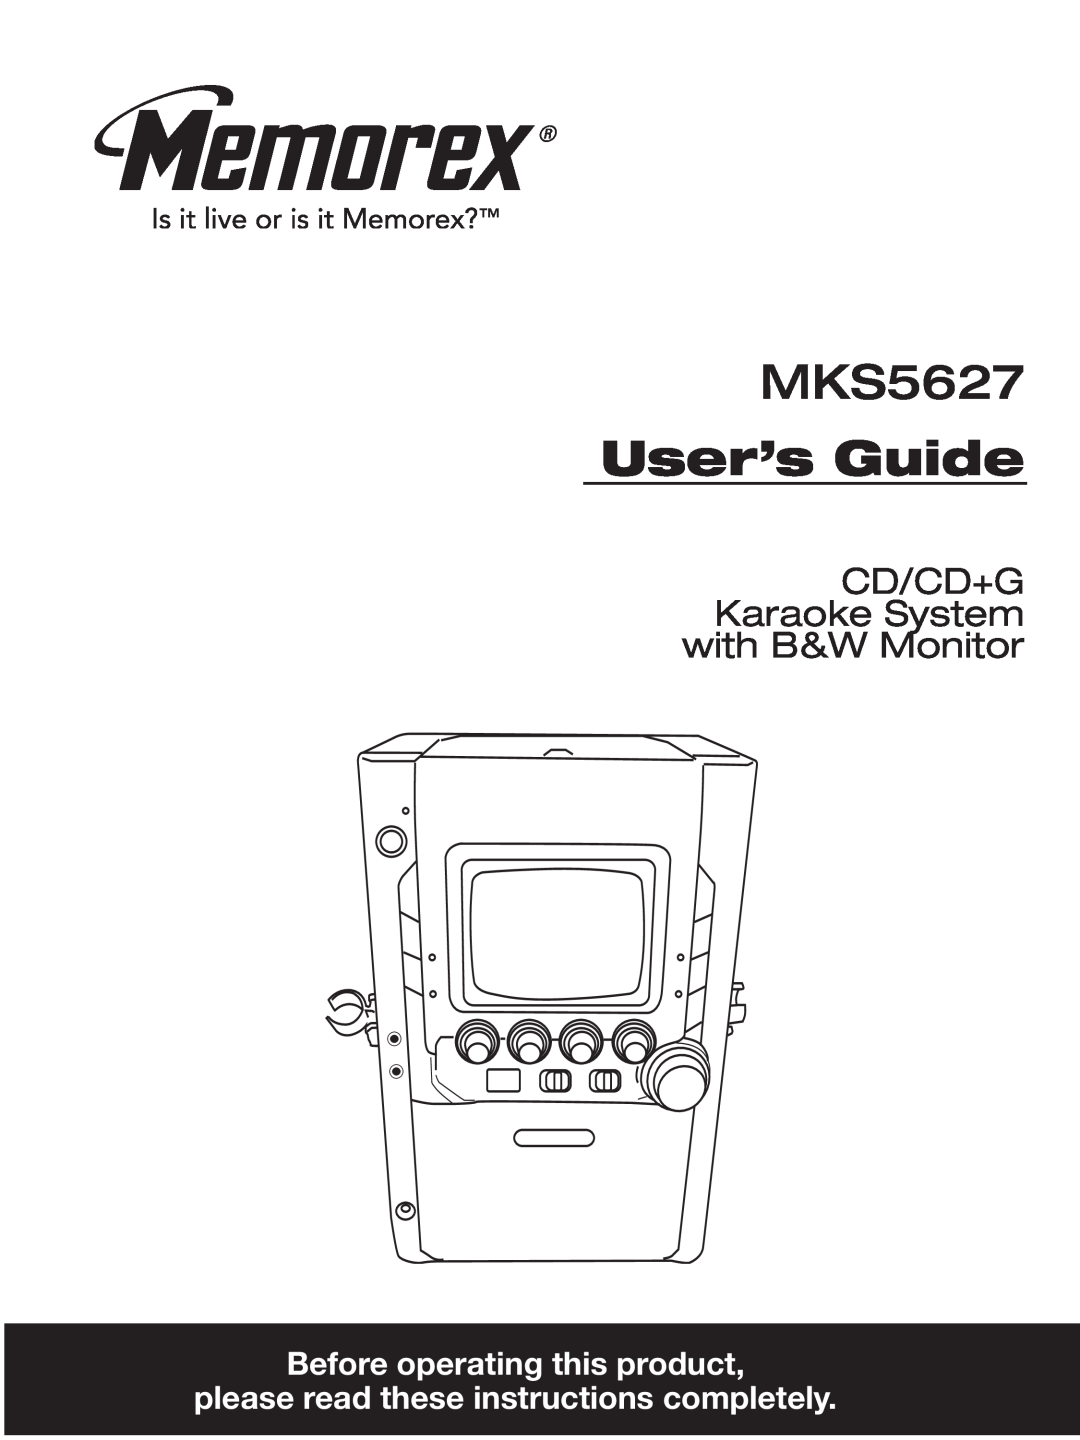 Memorex MKS5627 manual User’s Guide, CD/CD+G Karaoke System with B&W Monitor, Before operating this product 